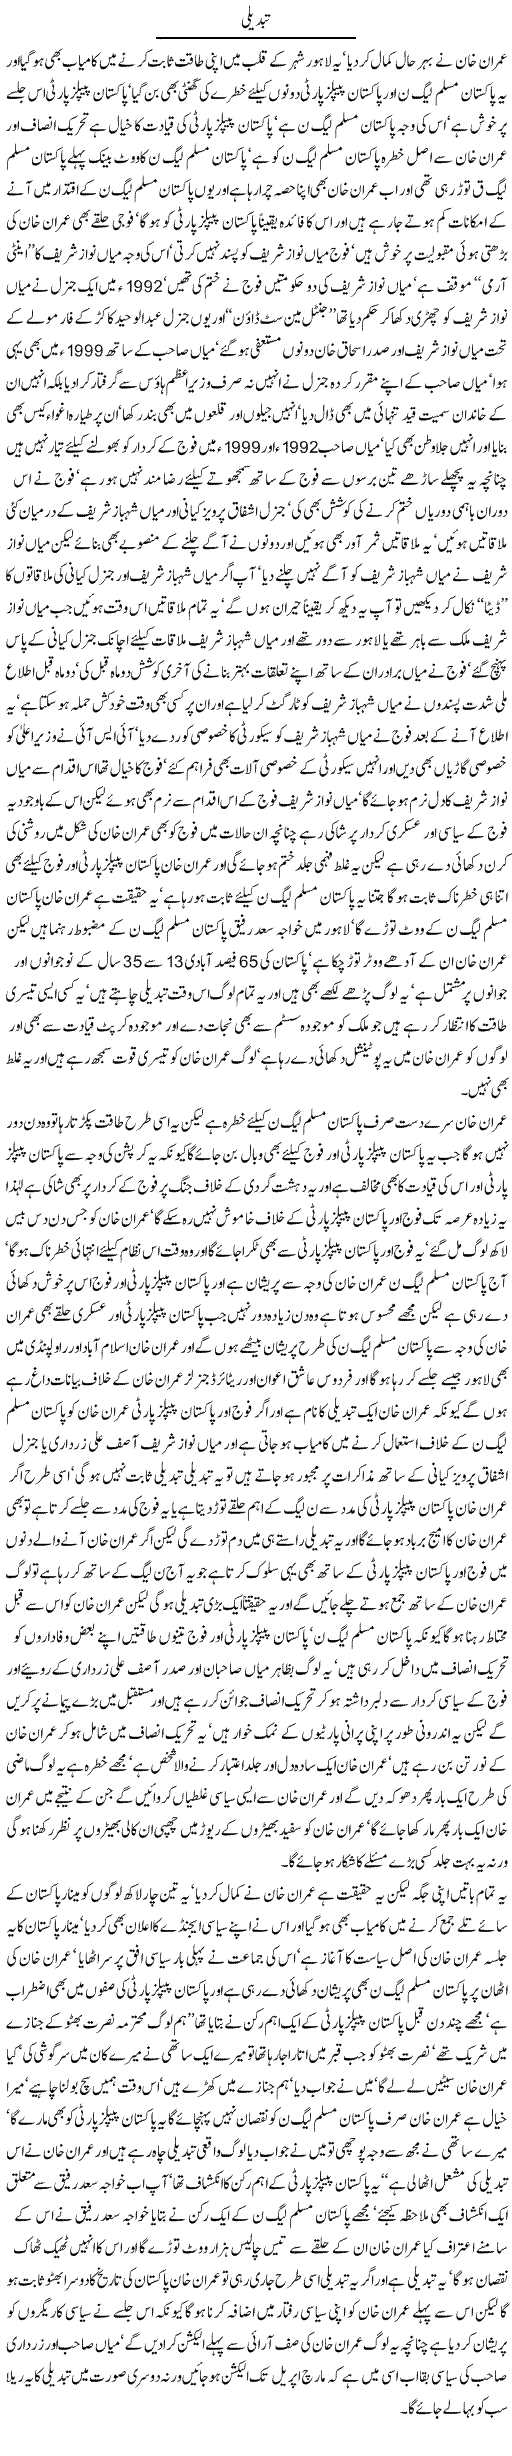 1101367903 2 Change by Javed Chaudhry